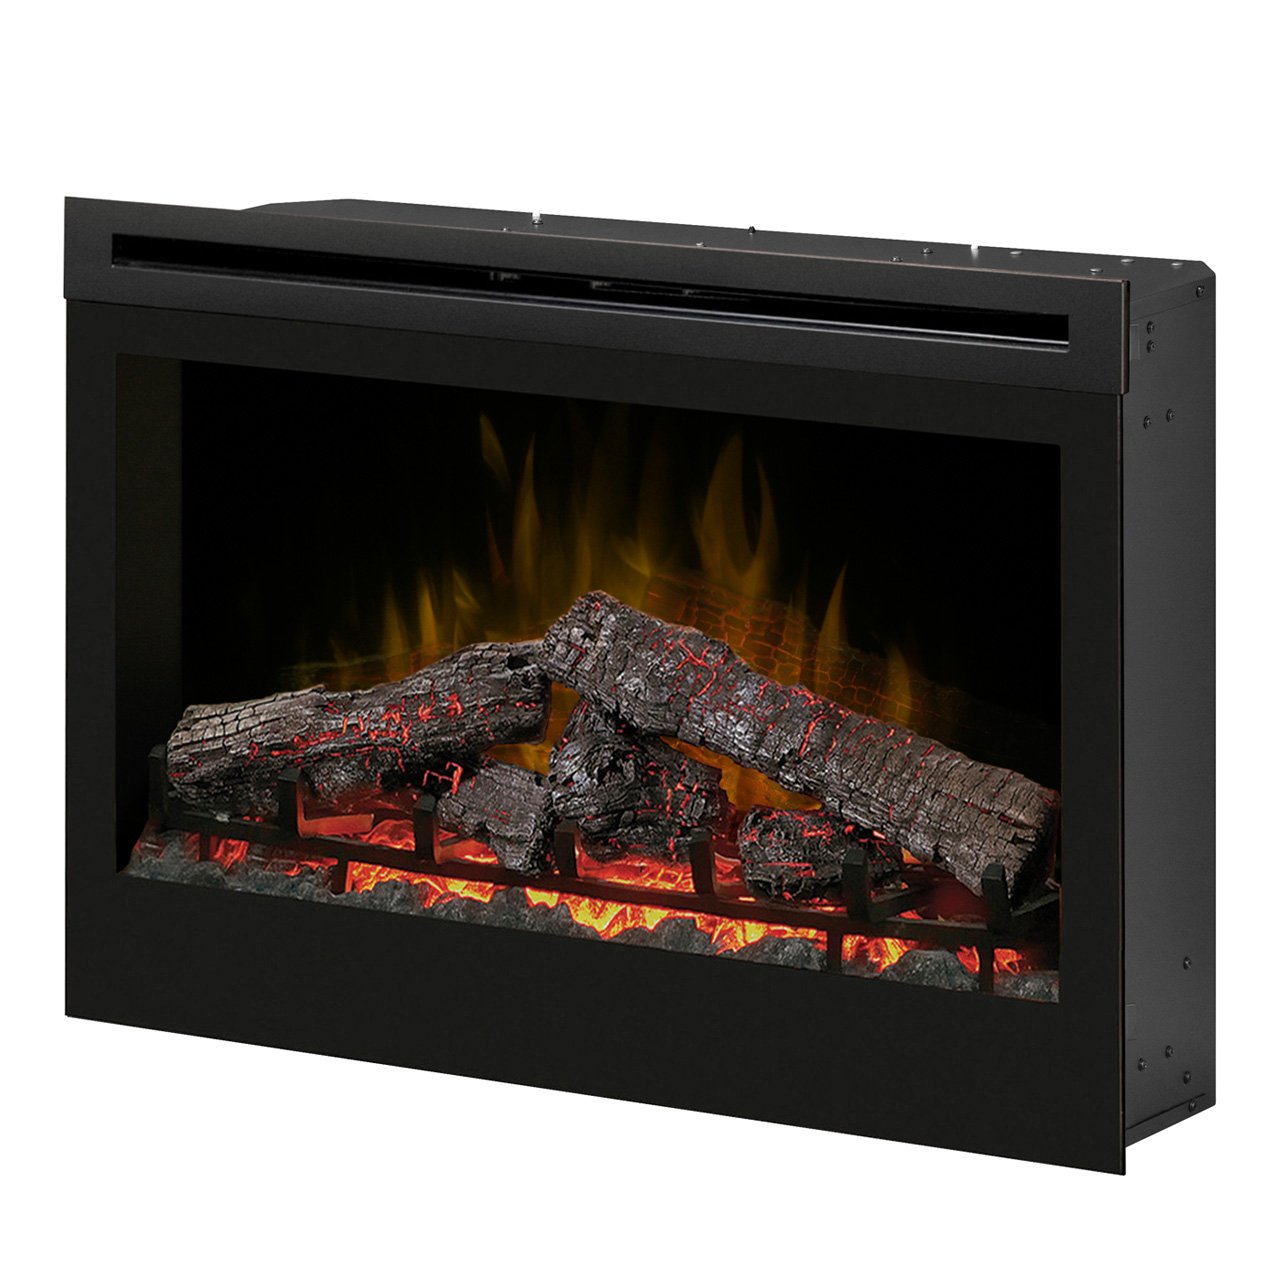 Gas Fireplace Reviews Elegant Dimplex Df3033st 33 Inch Self Trimming Electric Fireplace Insert